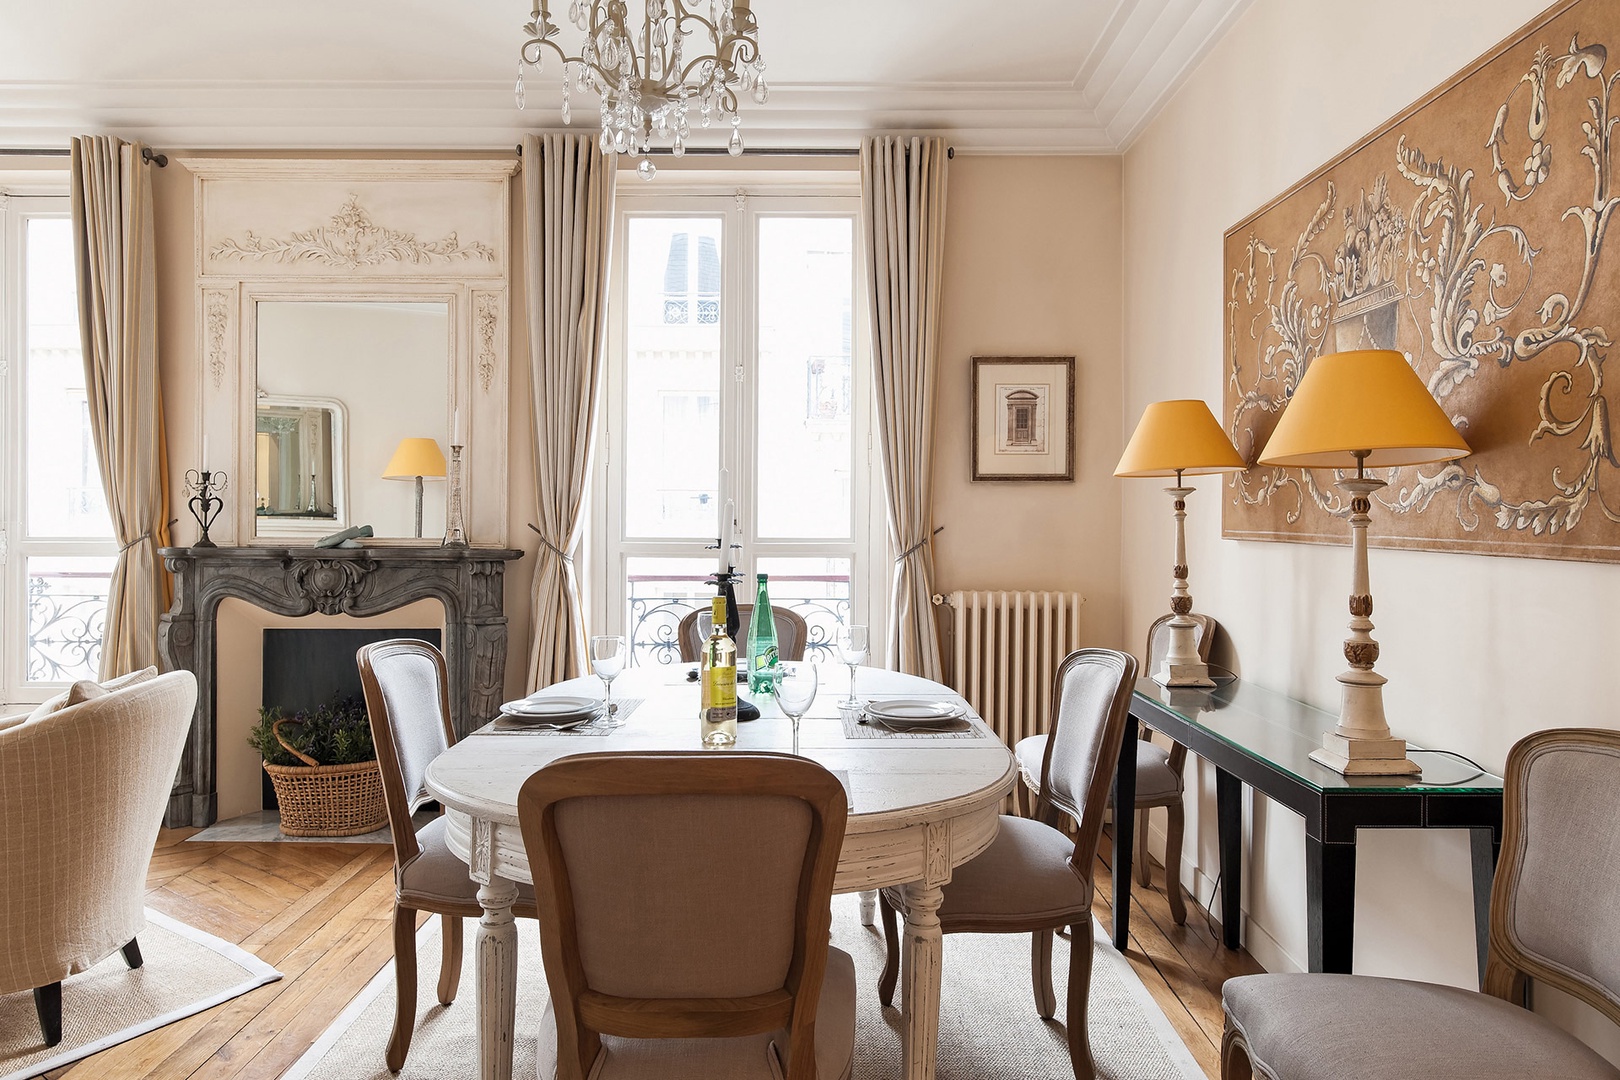 Enjoy meals in the comfort of your own Parisian apartment.